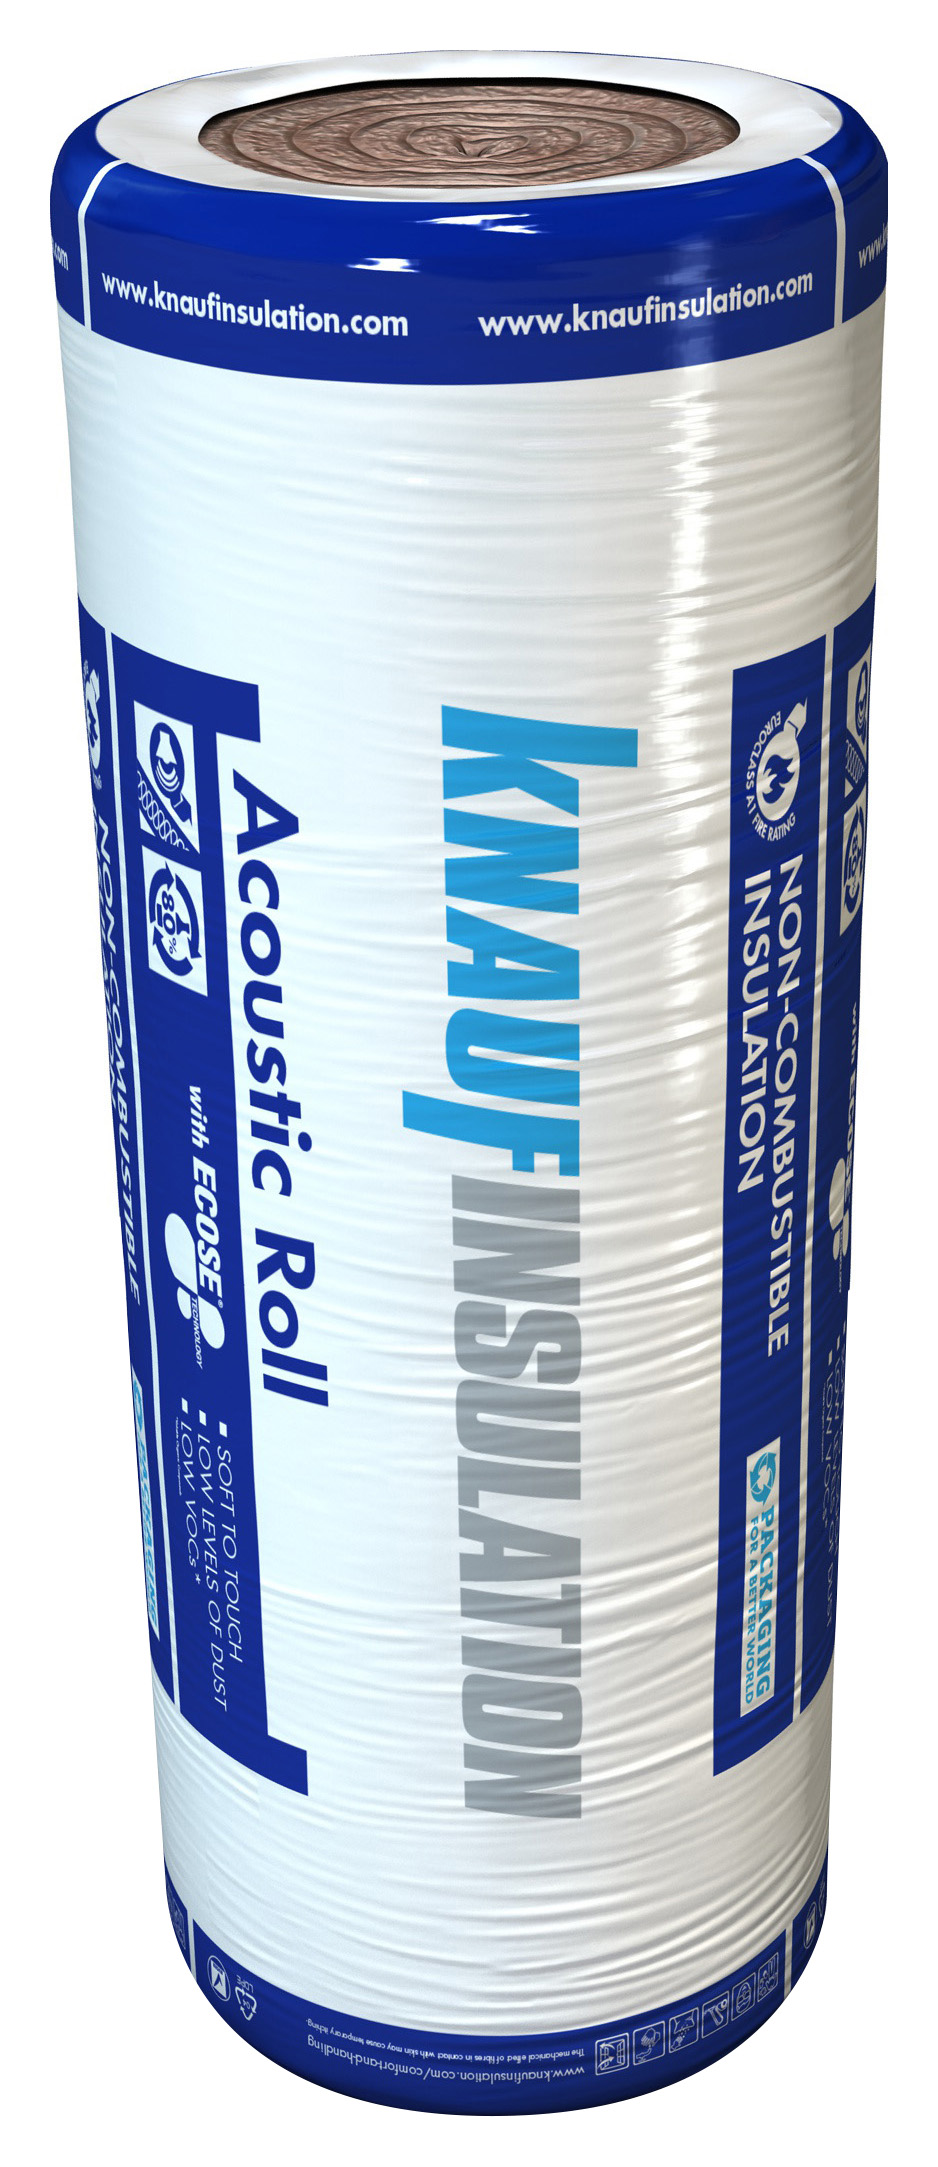 Image of Knauf Insulation Earthwool 50mm Acoustic Roll - 15.6m²